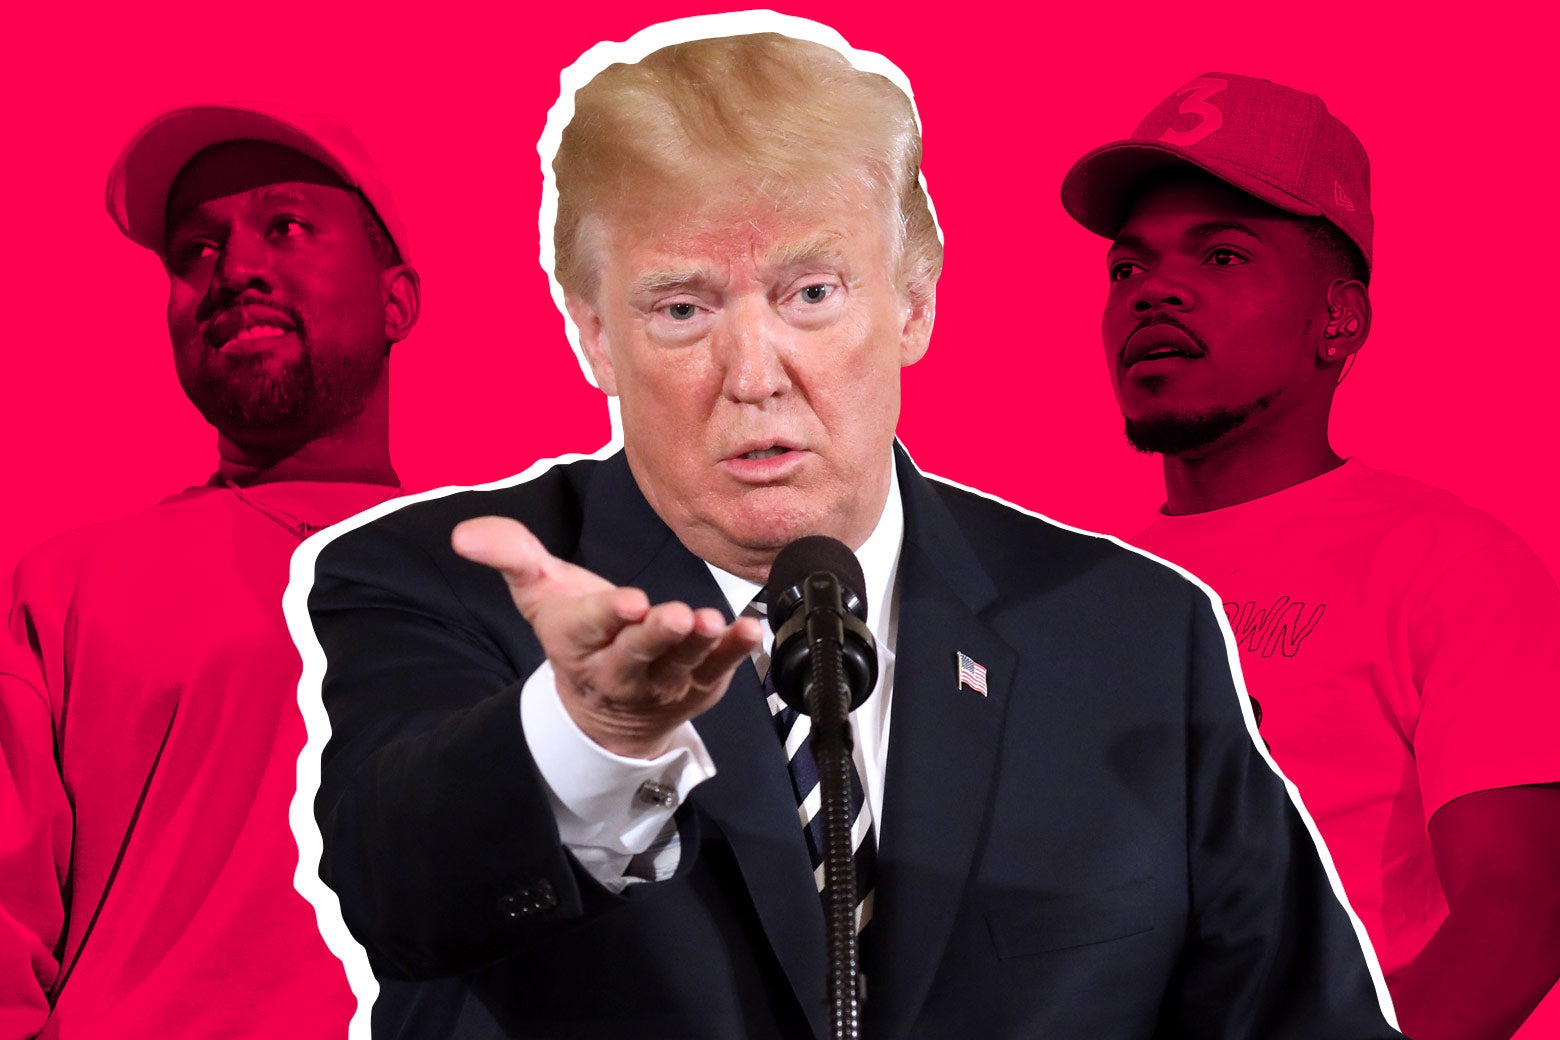 A photo collage of Kanye West, Donald Trump, and Chance the Rapper.